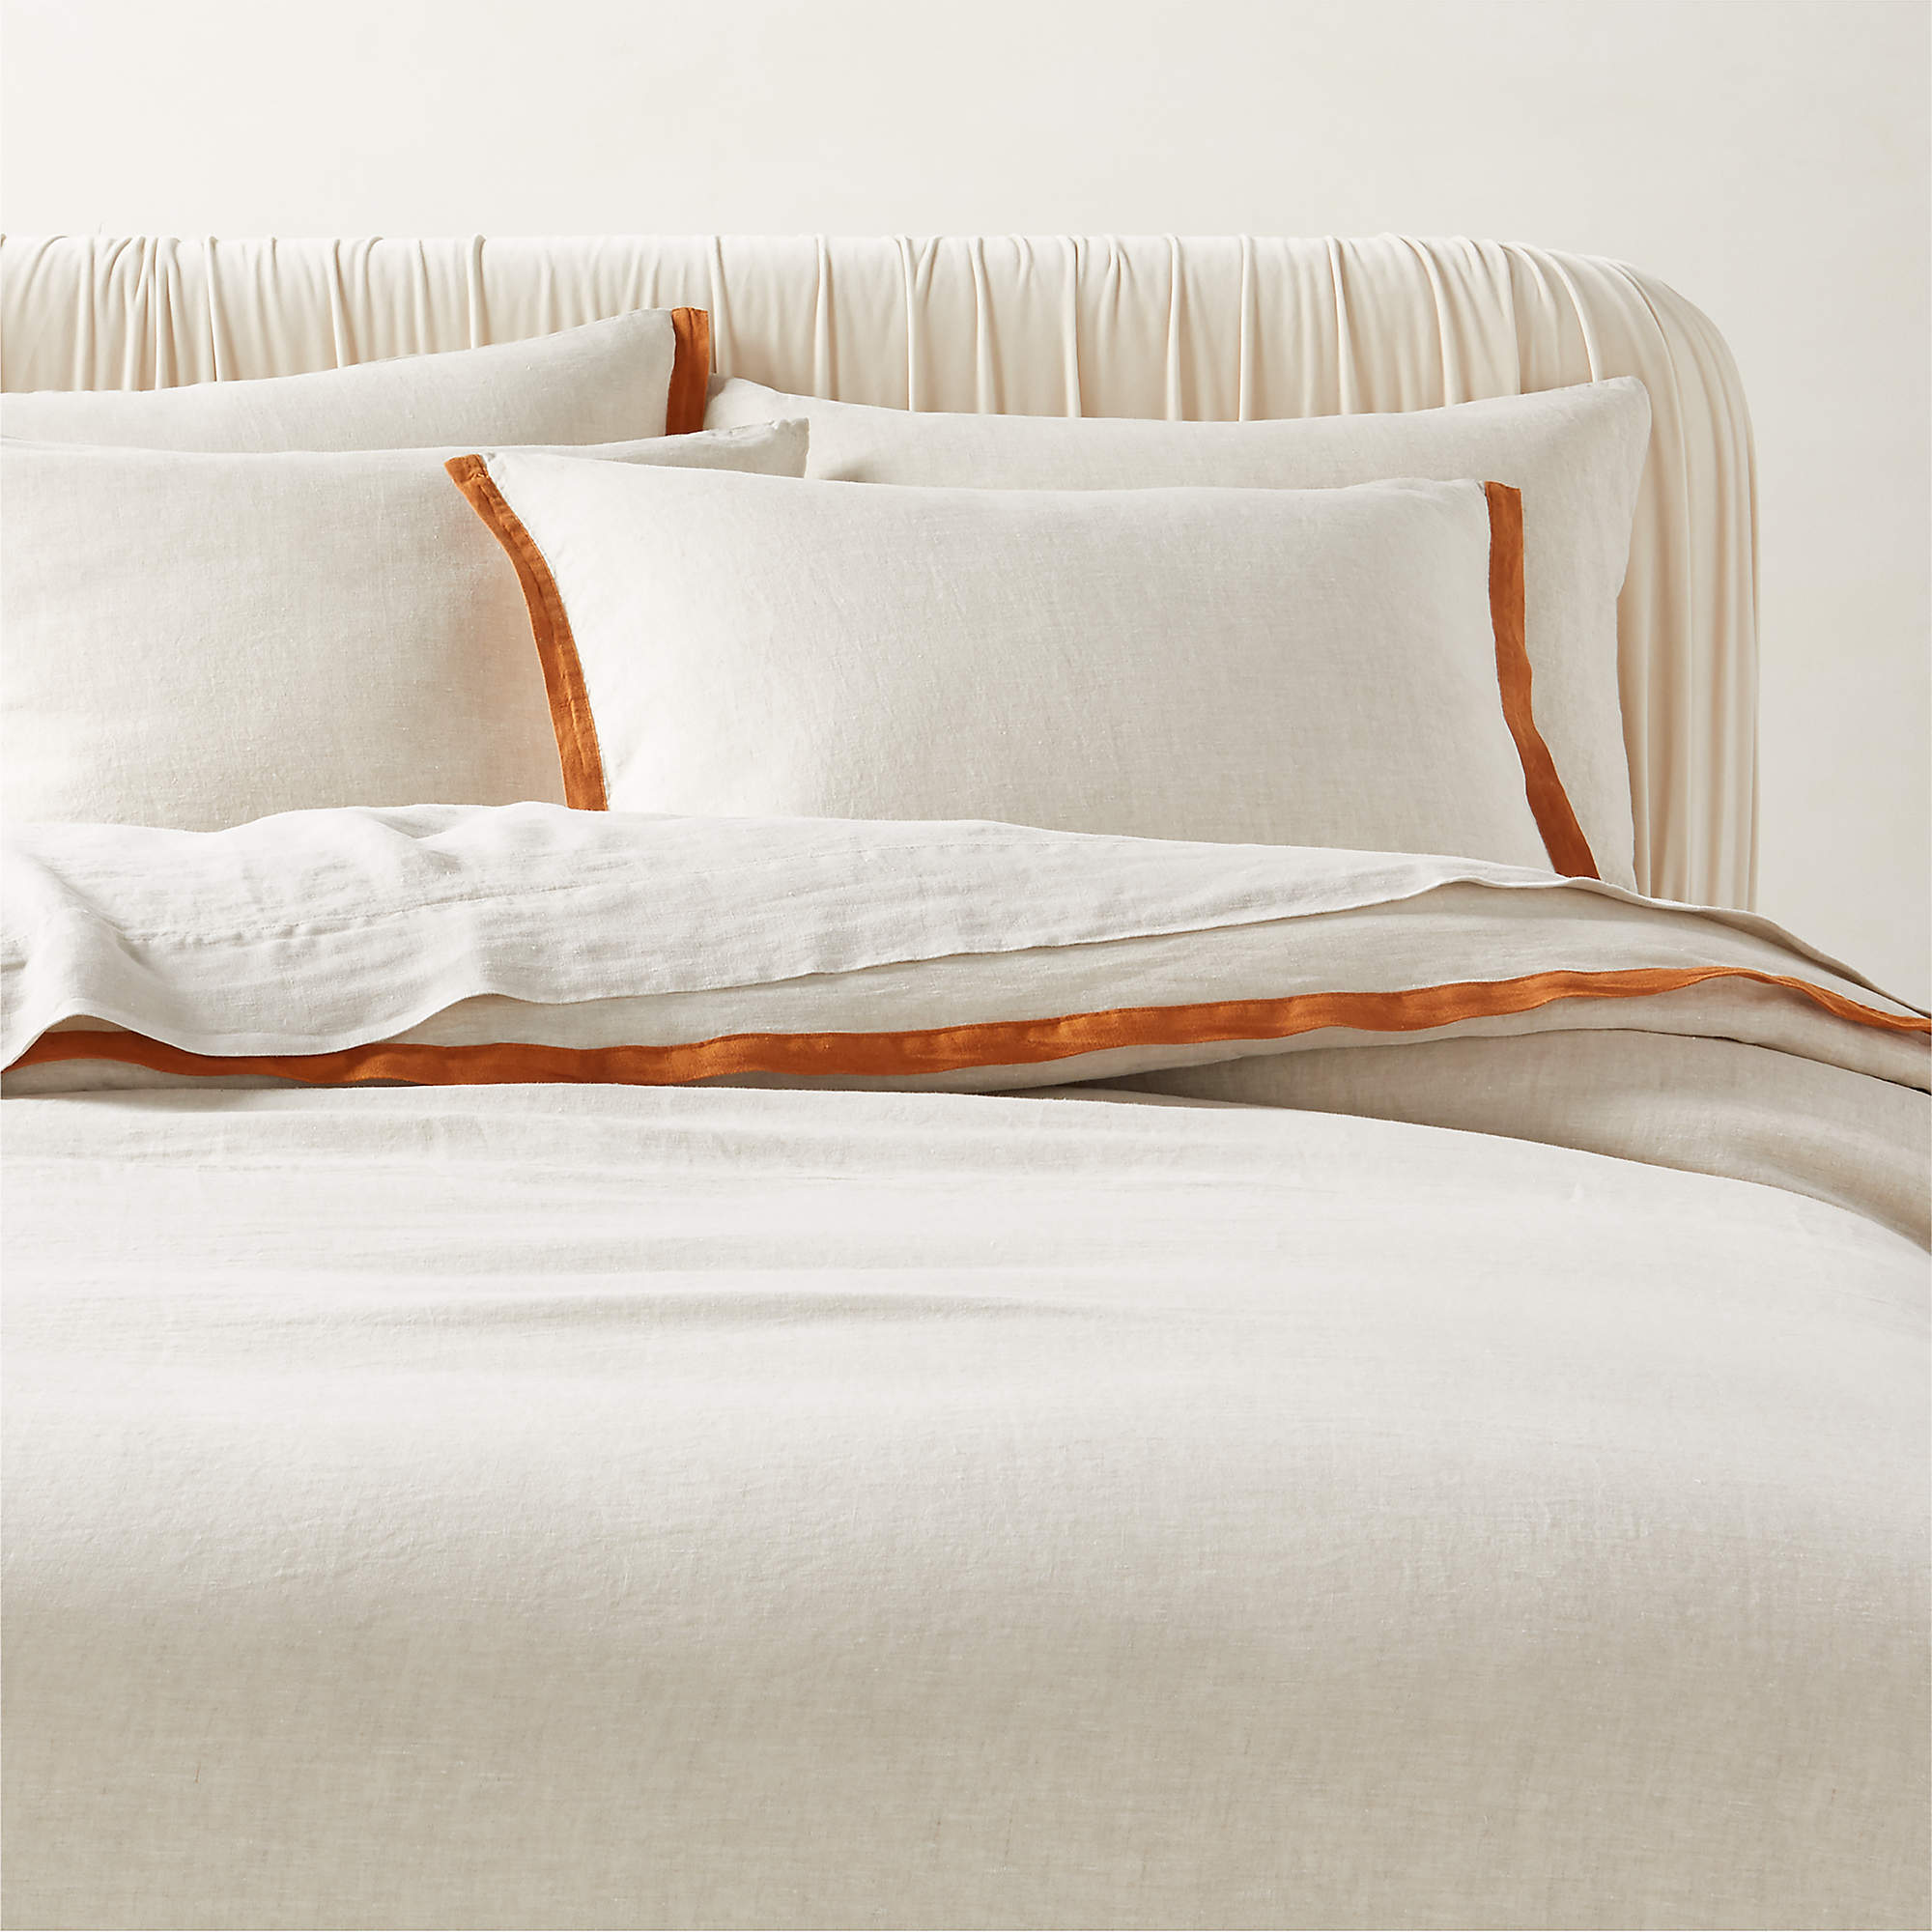 Shop BORDER EUROPEAN FLAX LINEN KING DUVET COVER WITH COPPER BORDER | Quantity: 1 from CB2 on Openhaus